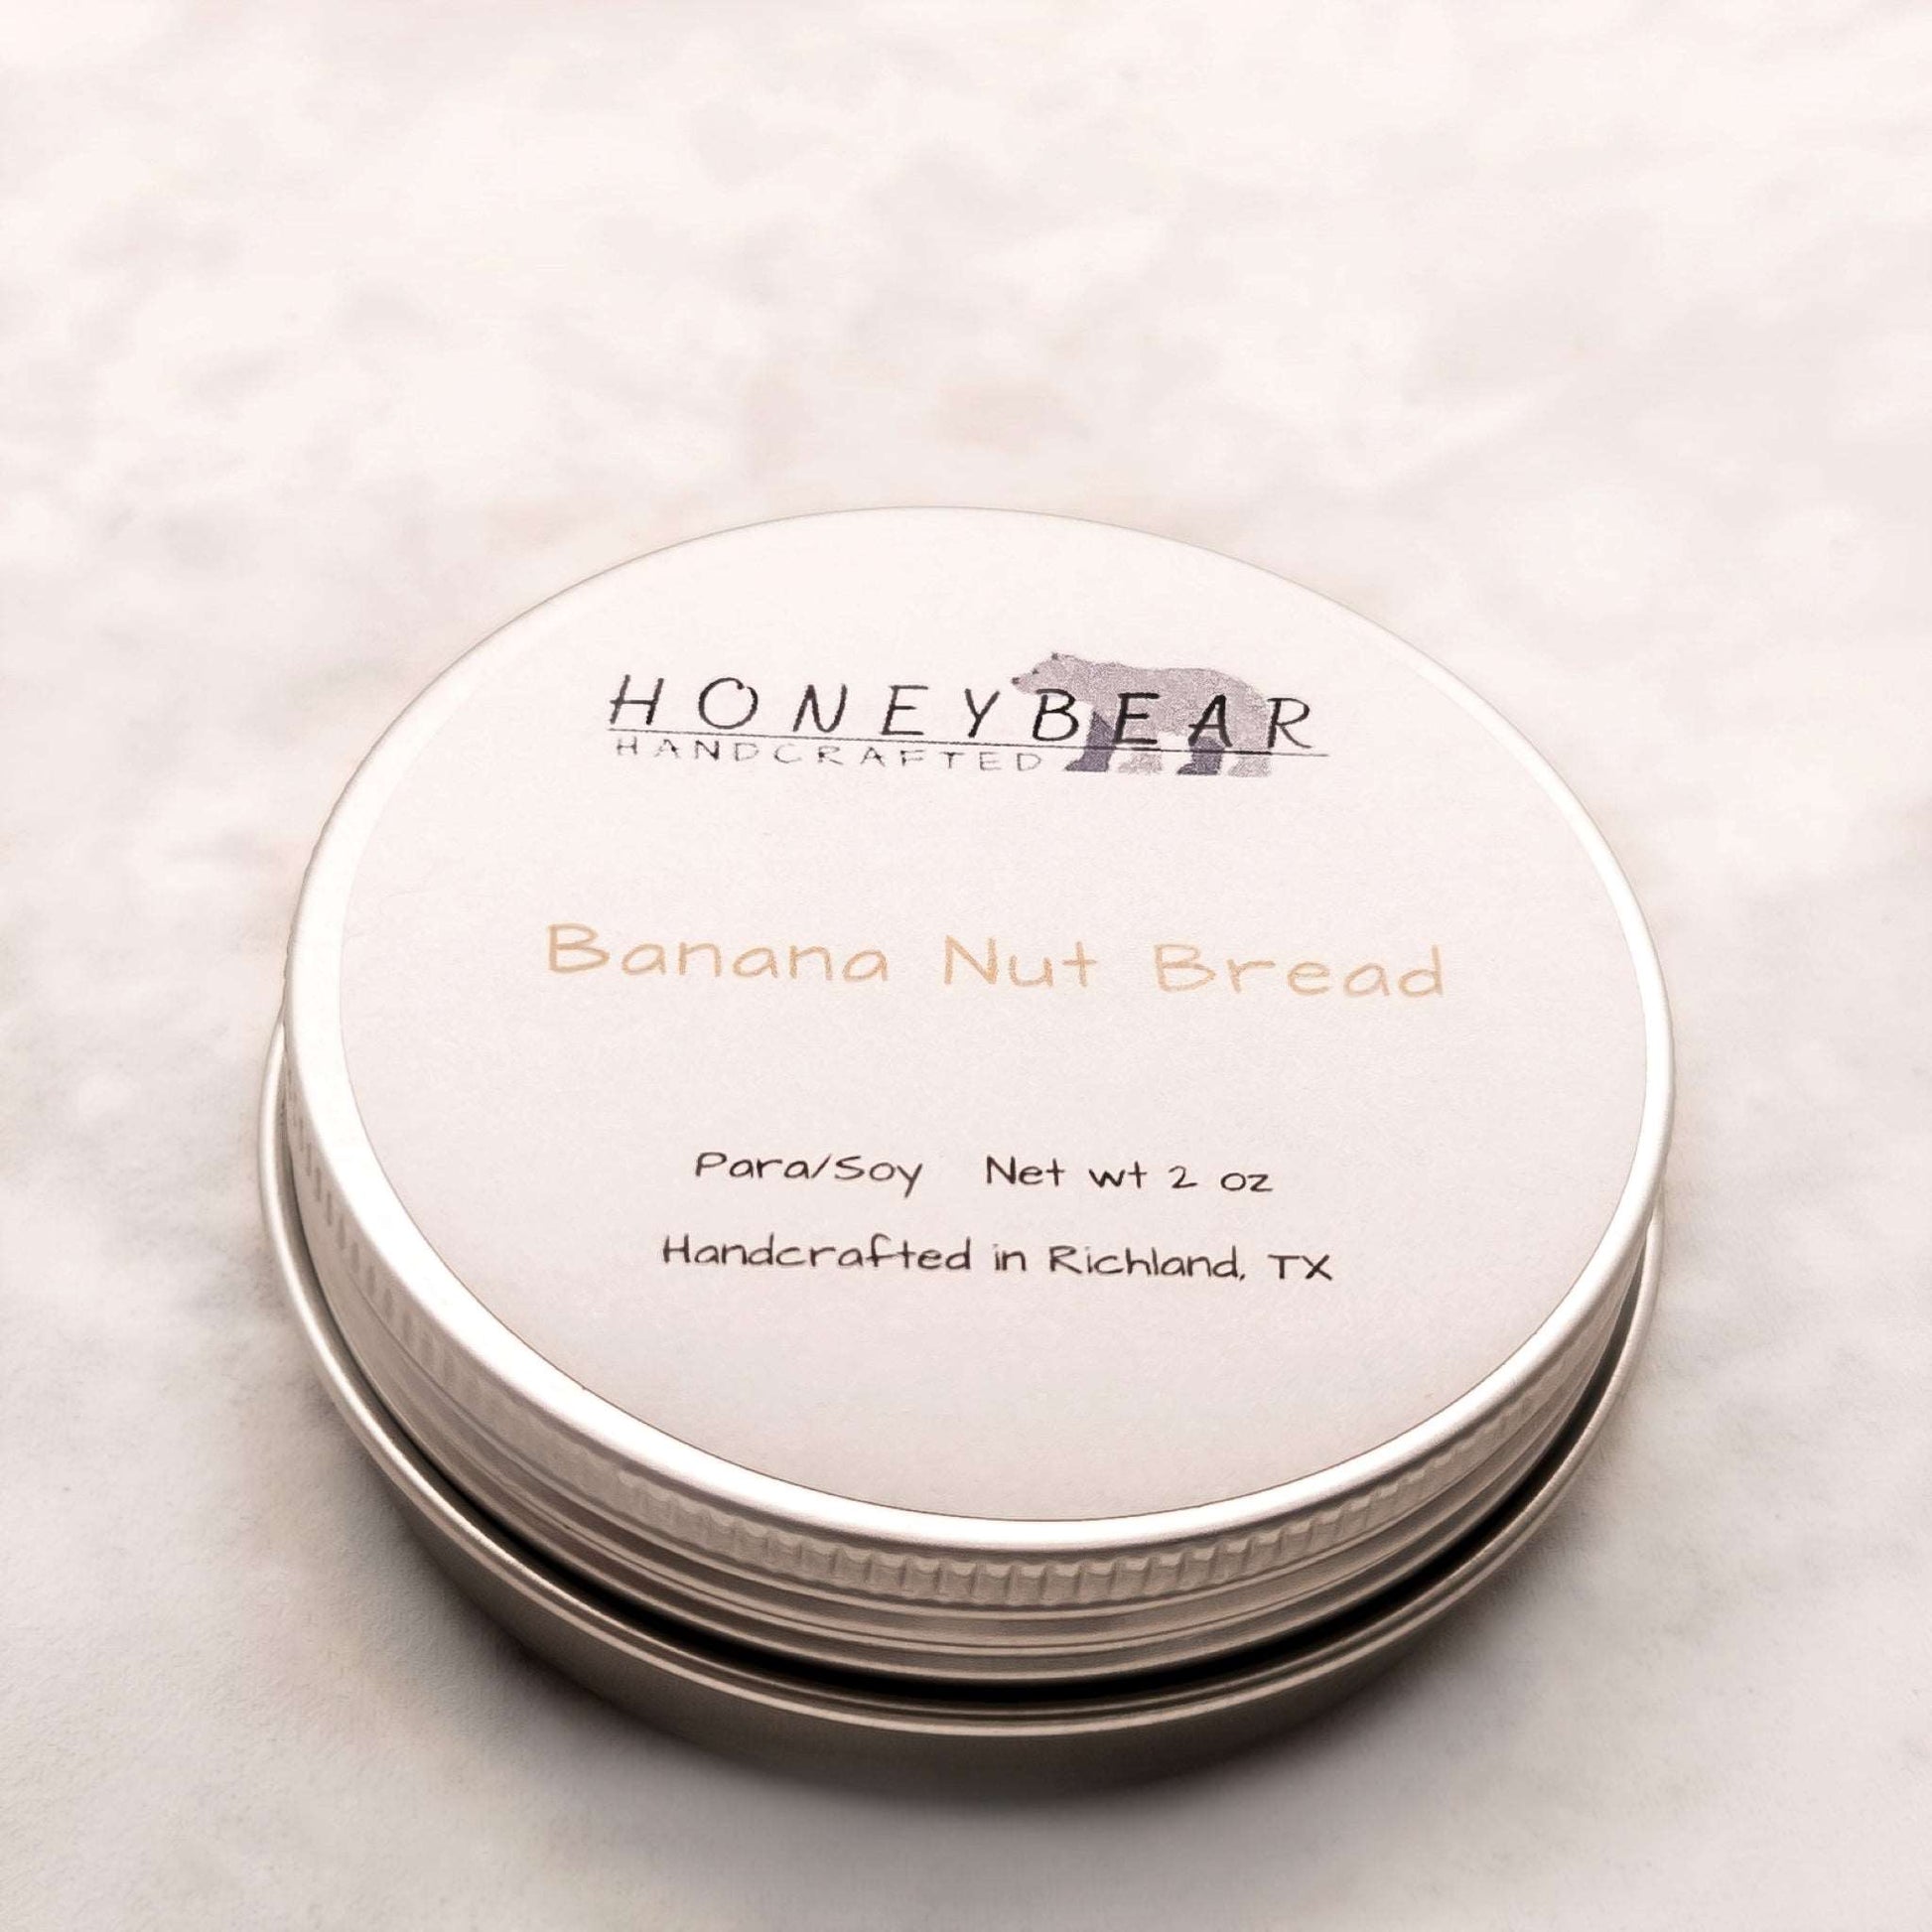 image of 2 oz travel or sample size candle labeled Banana Nut Bread on a white background